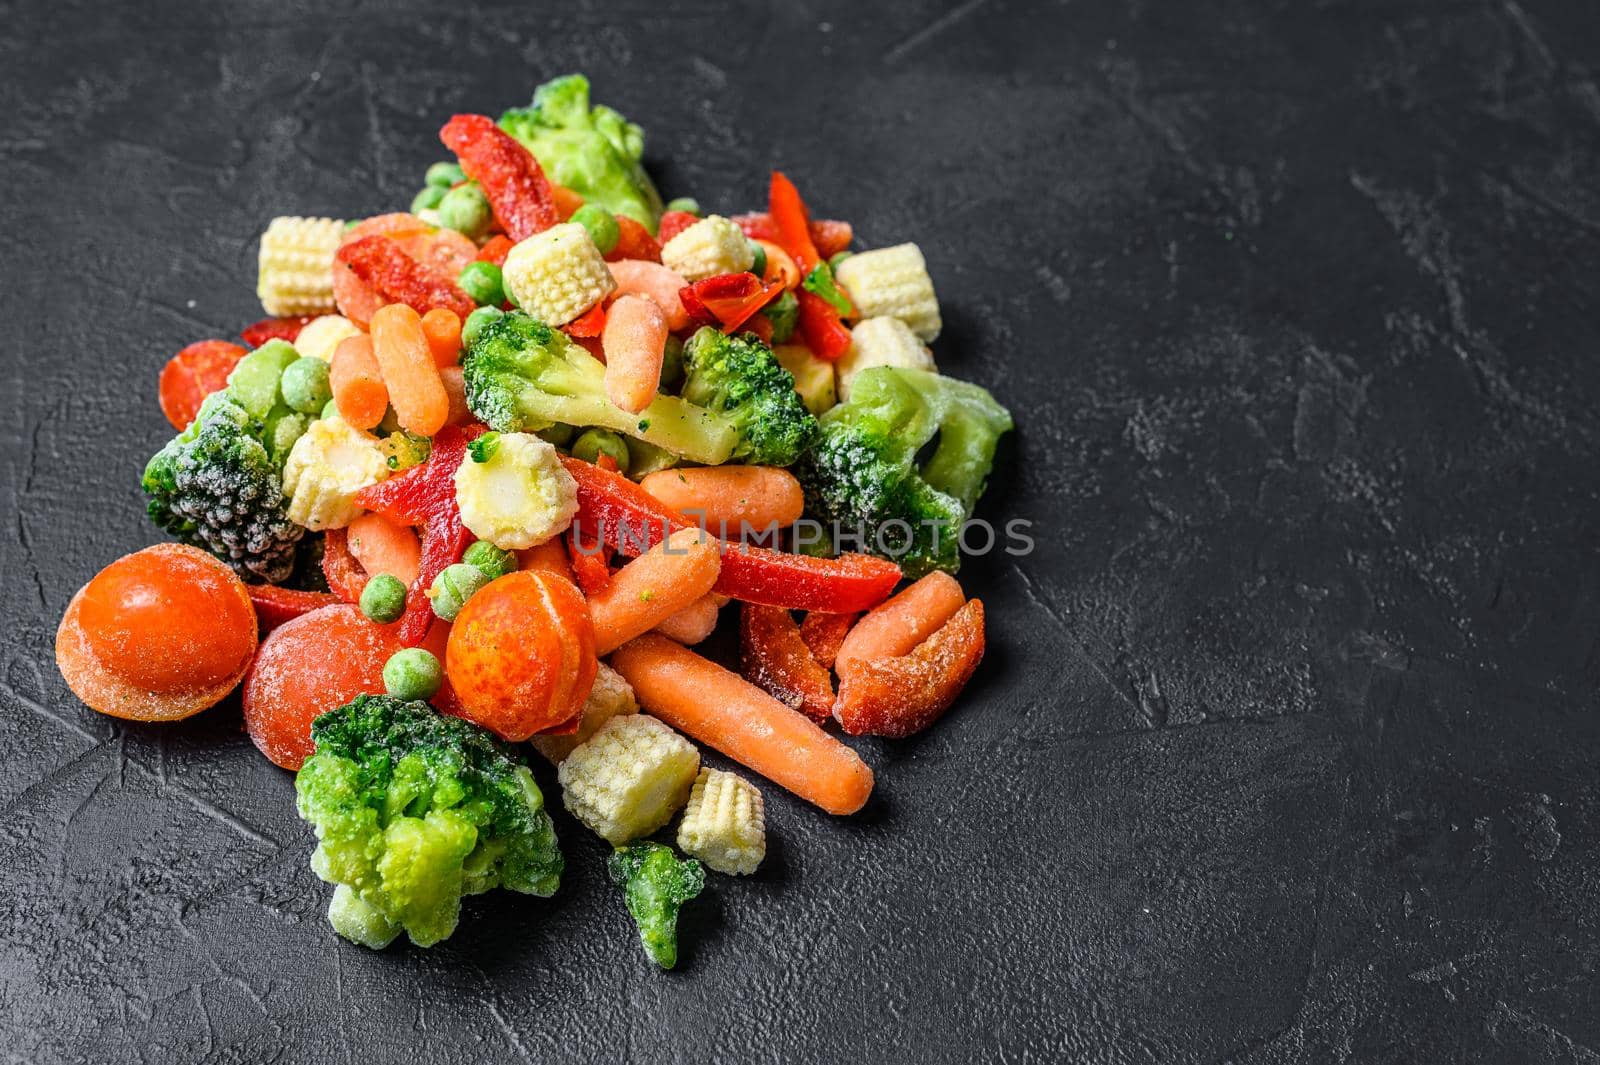 Frozen cold sliced Vegetables, broccoli, sweet peppers, tomatoes, carrots, peas and corn. Black background. top view. Copy space.